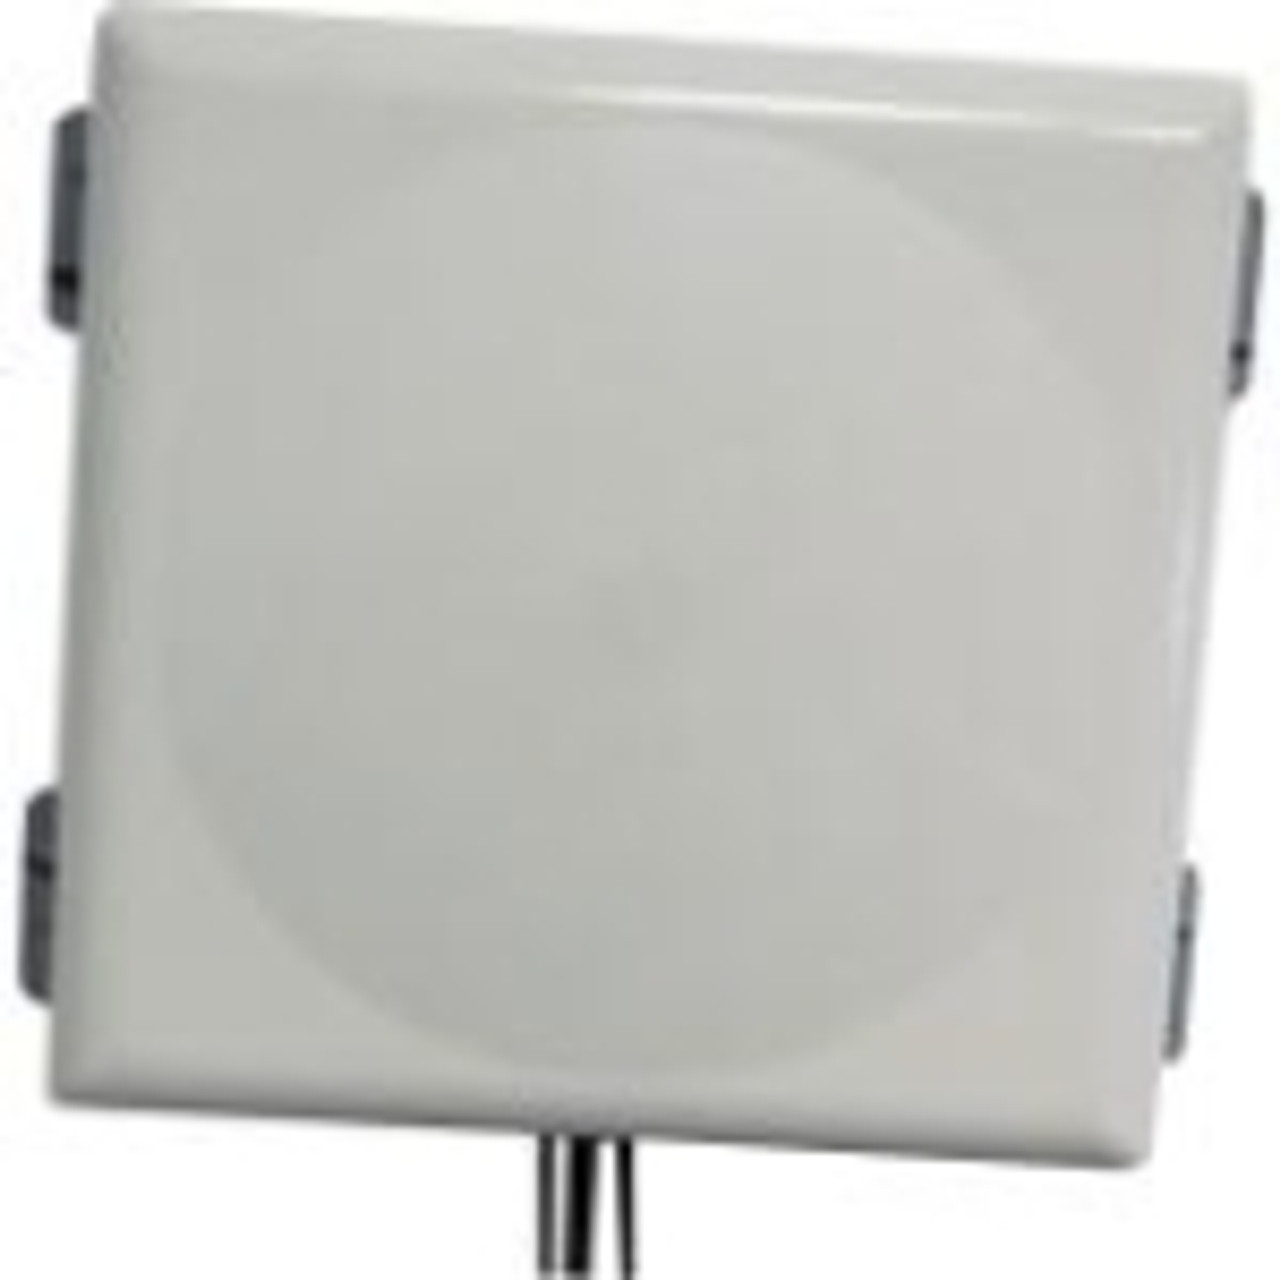 JW019A Aruba Outdoor 4x4 MIMO Antenna 2.40 GHz, 4.90 GHz to 2.50 GHz 8 dBi Wireless Data Network, Outdoor, IndoorPole/Wall RP-SMA Connector